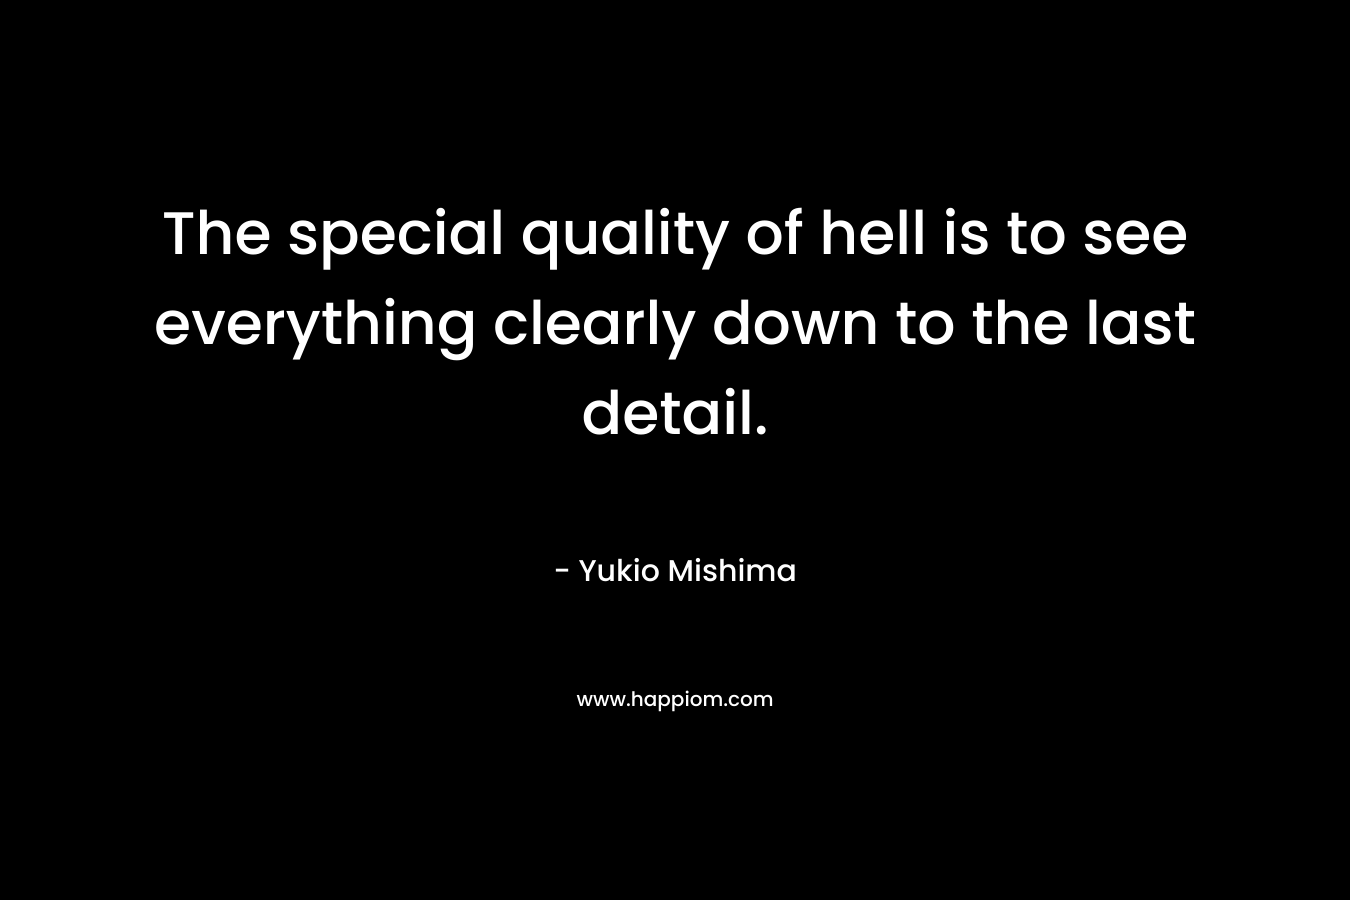 The special quality of hell is to see everything clearly down to the last detail.